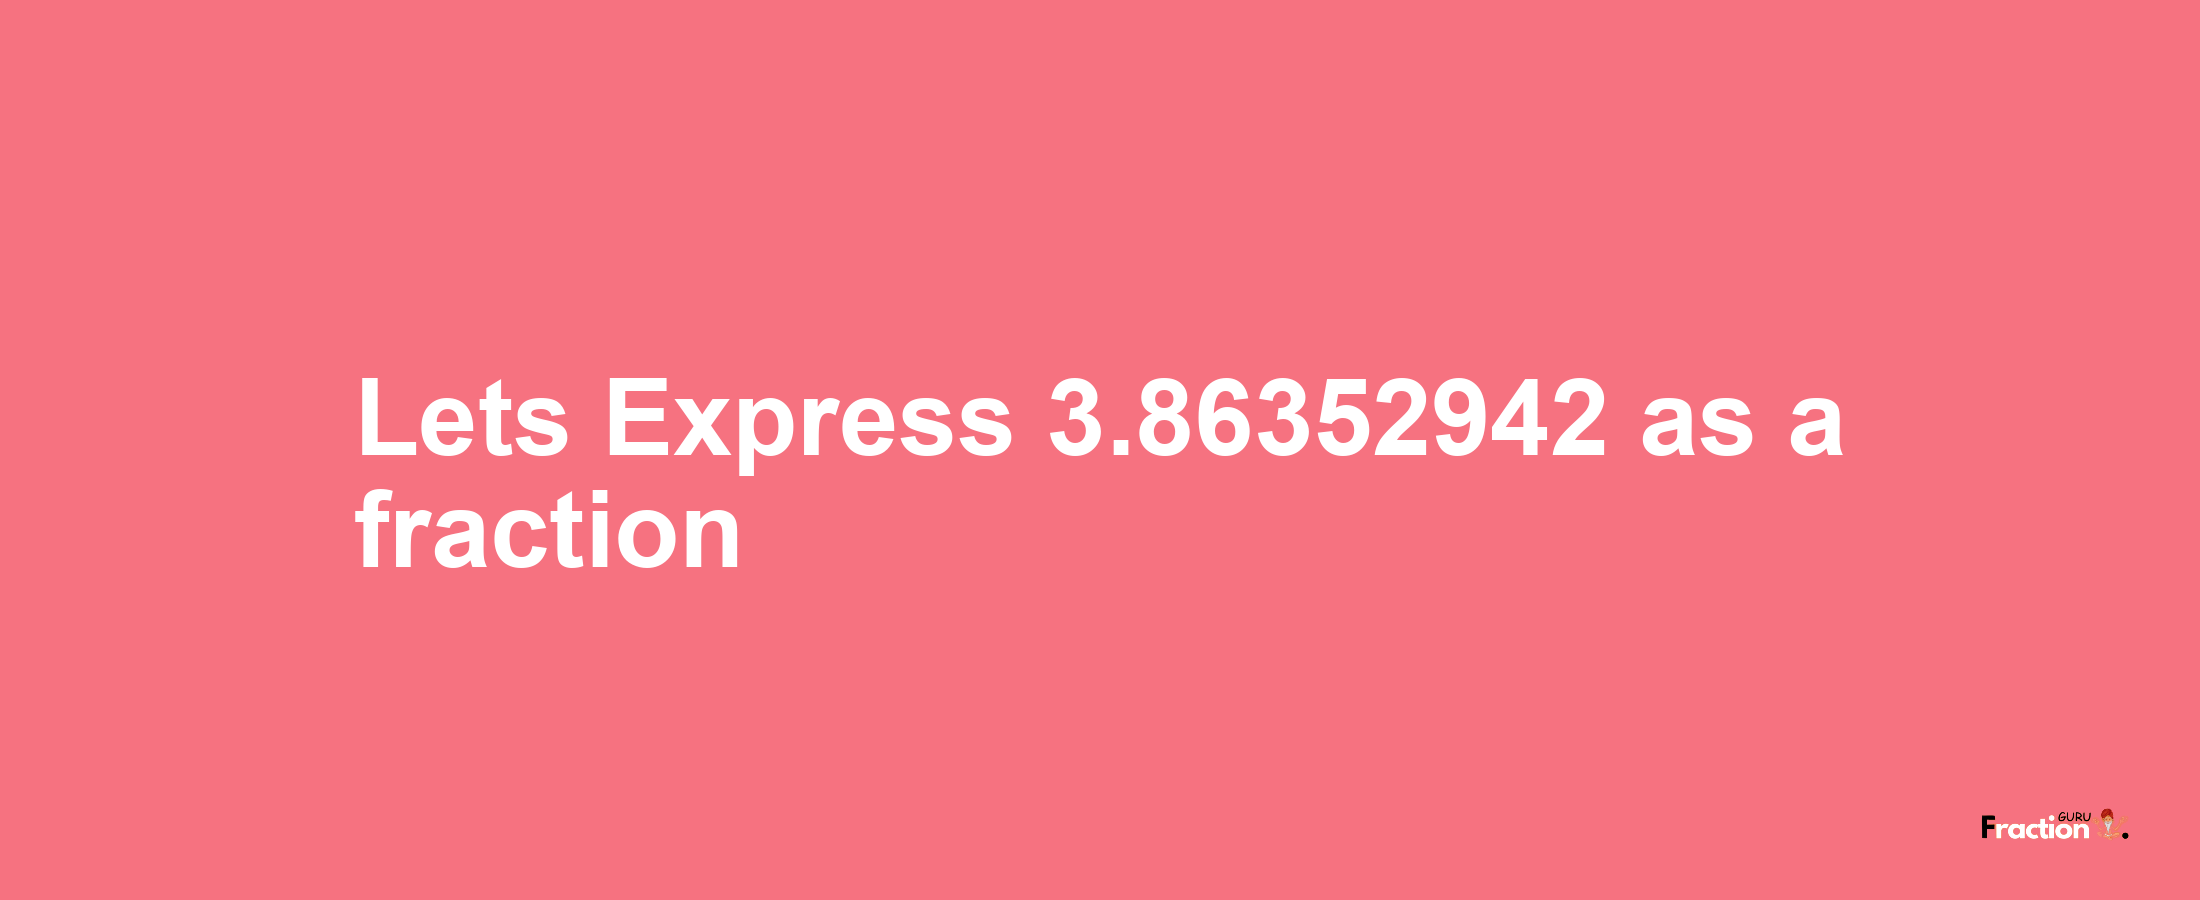 Lets Express 3.86352942 as afraction